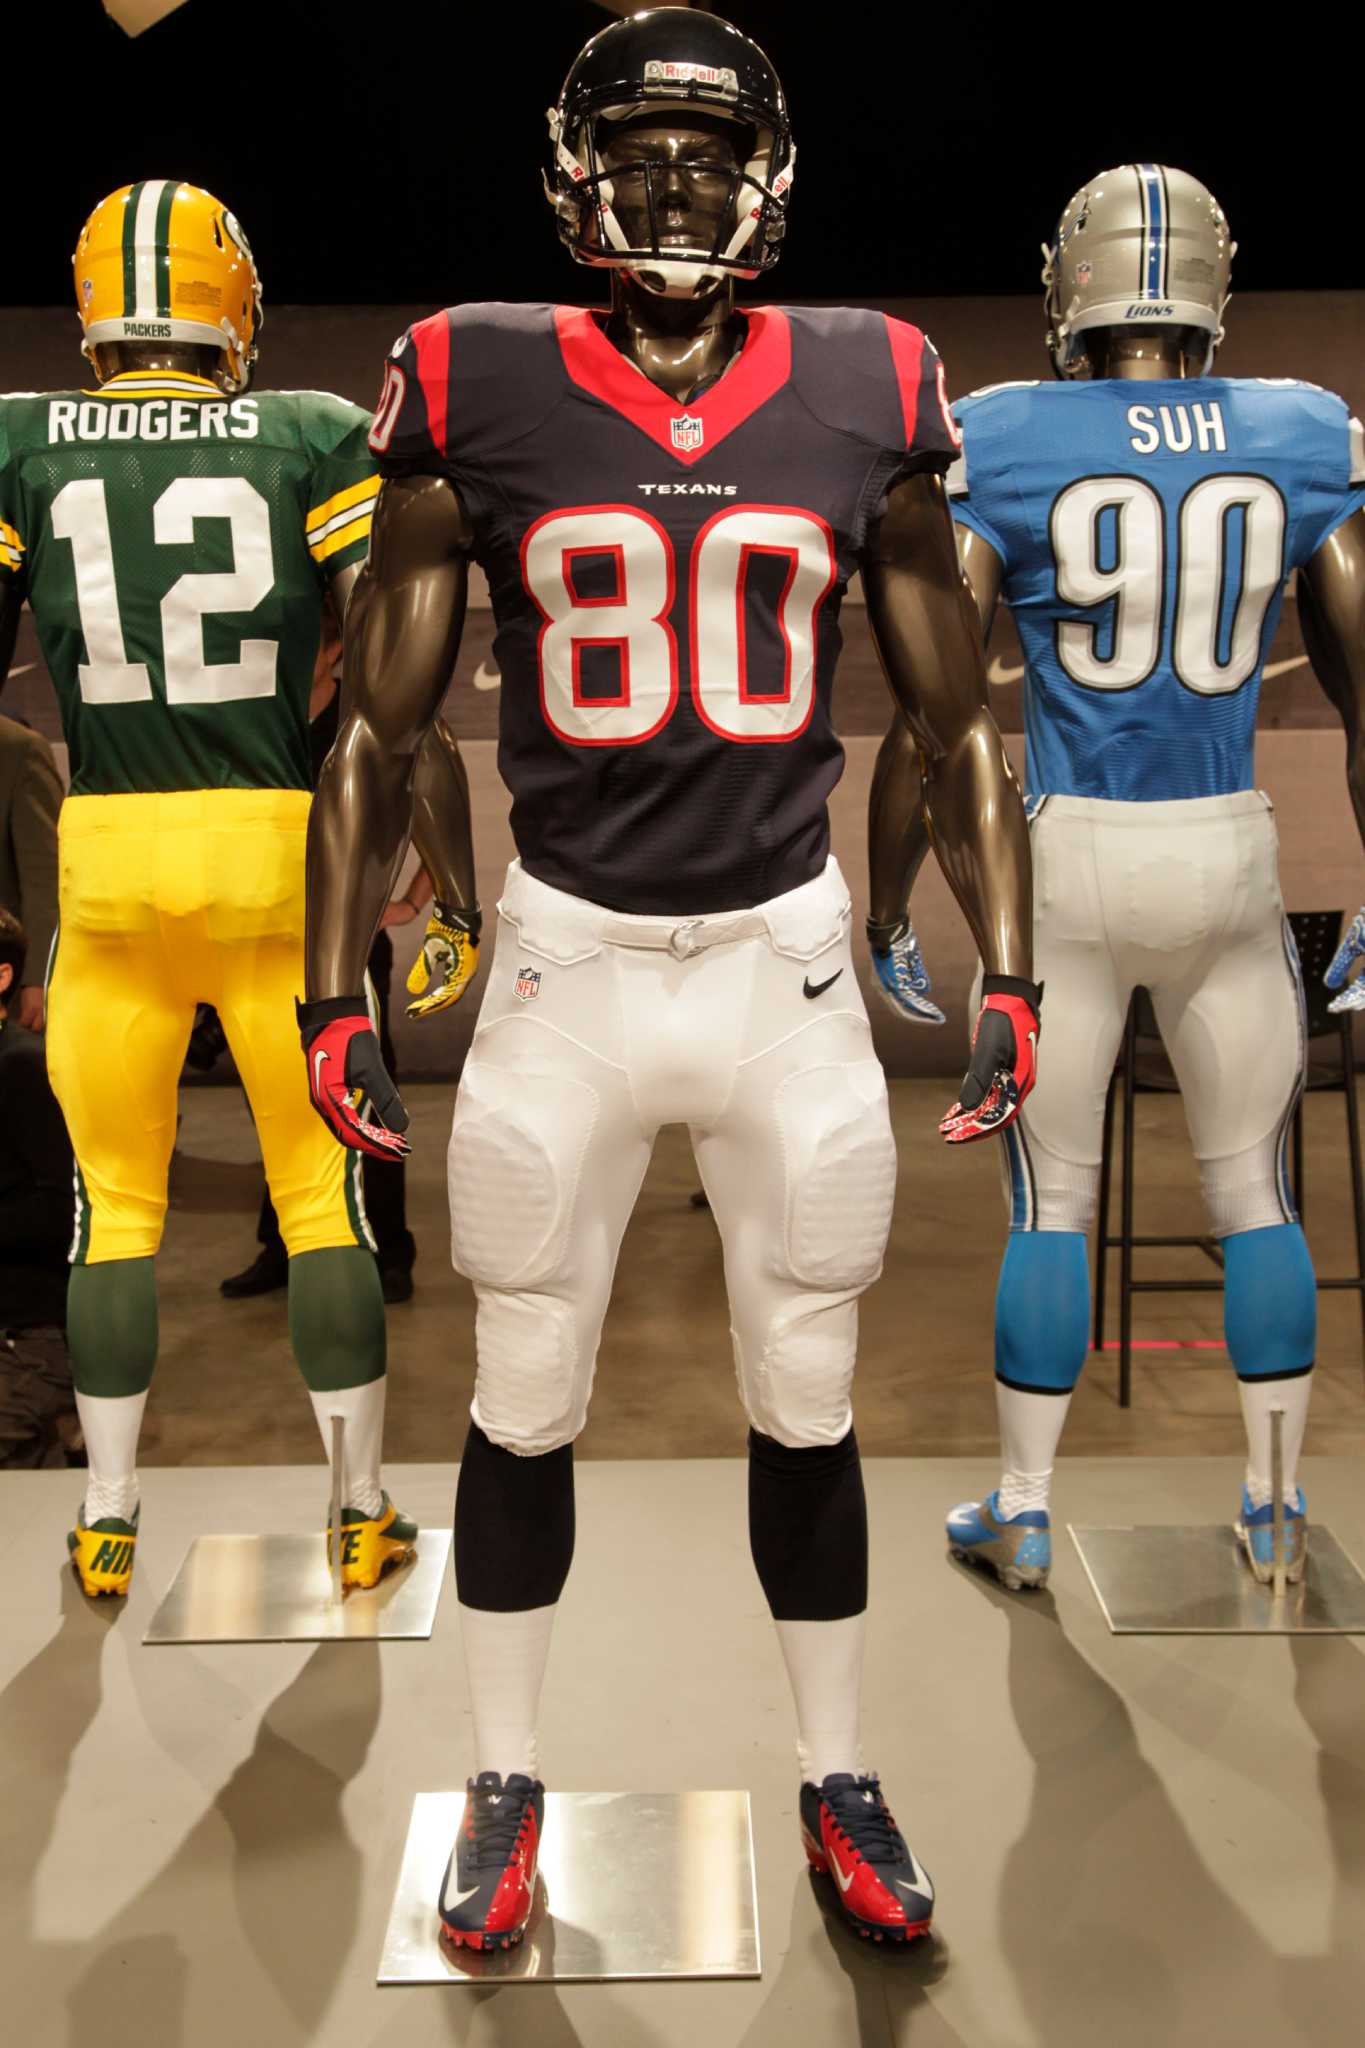 New Texans Nike Uniforms Unveiled With No Real Change